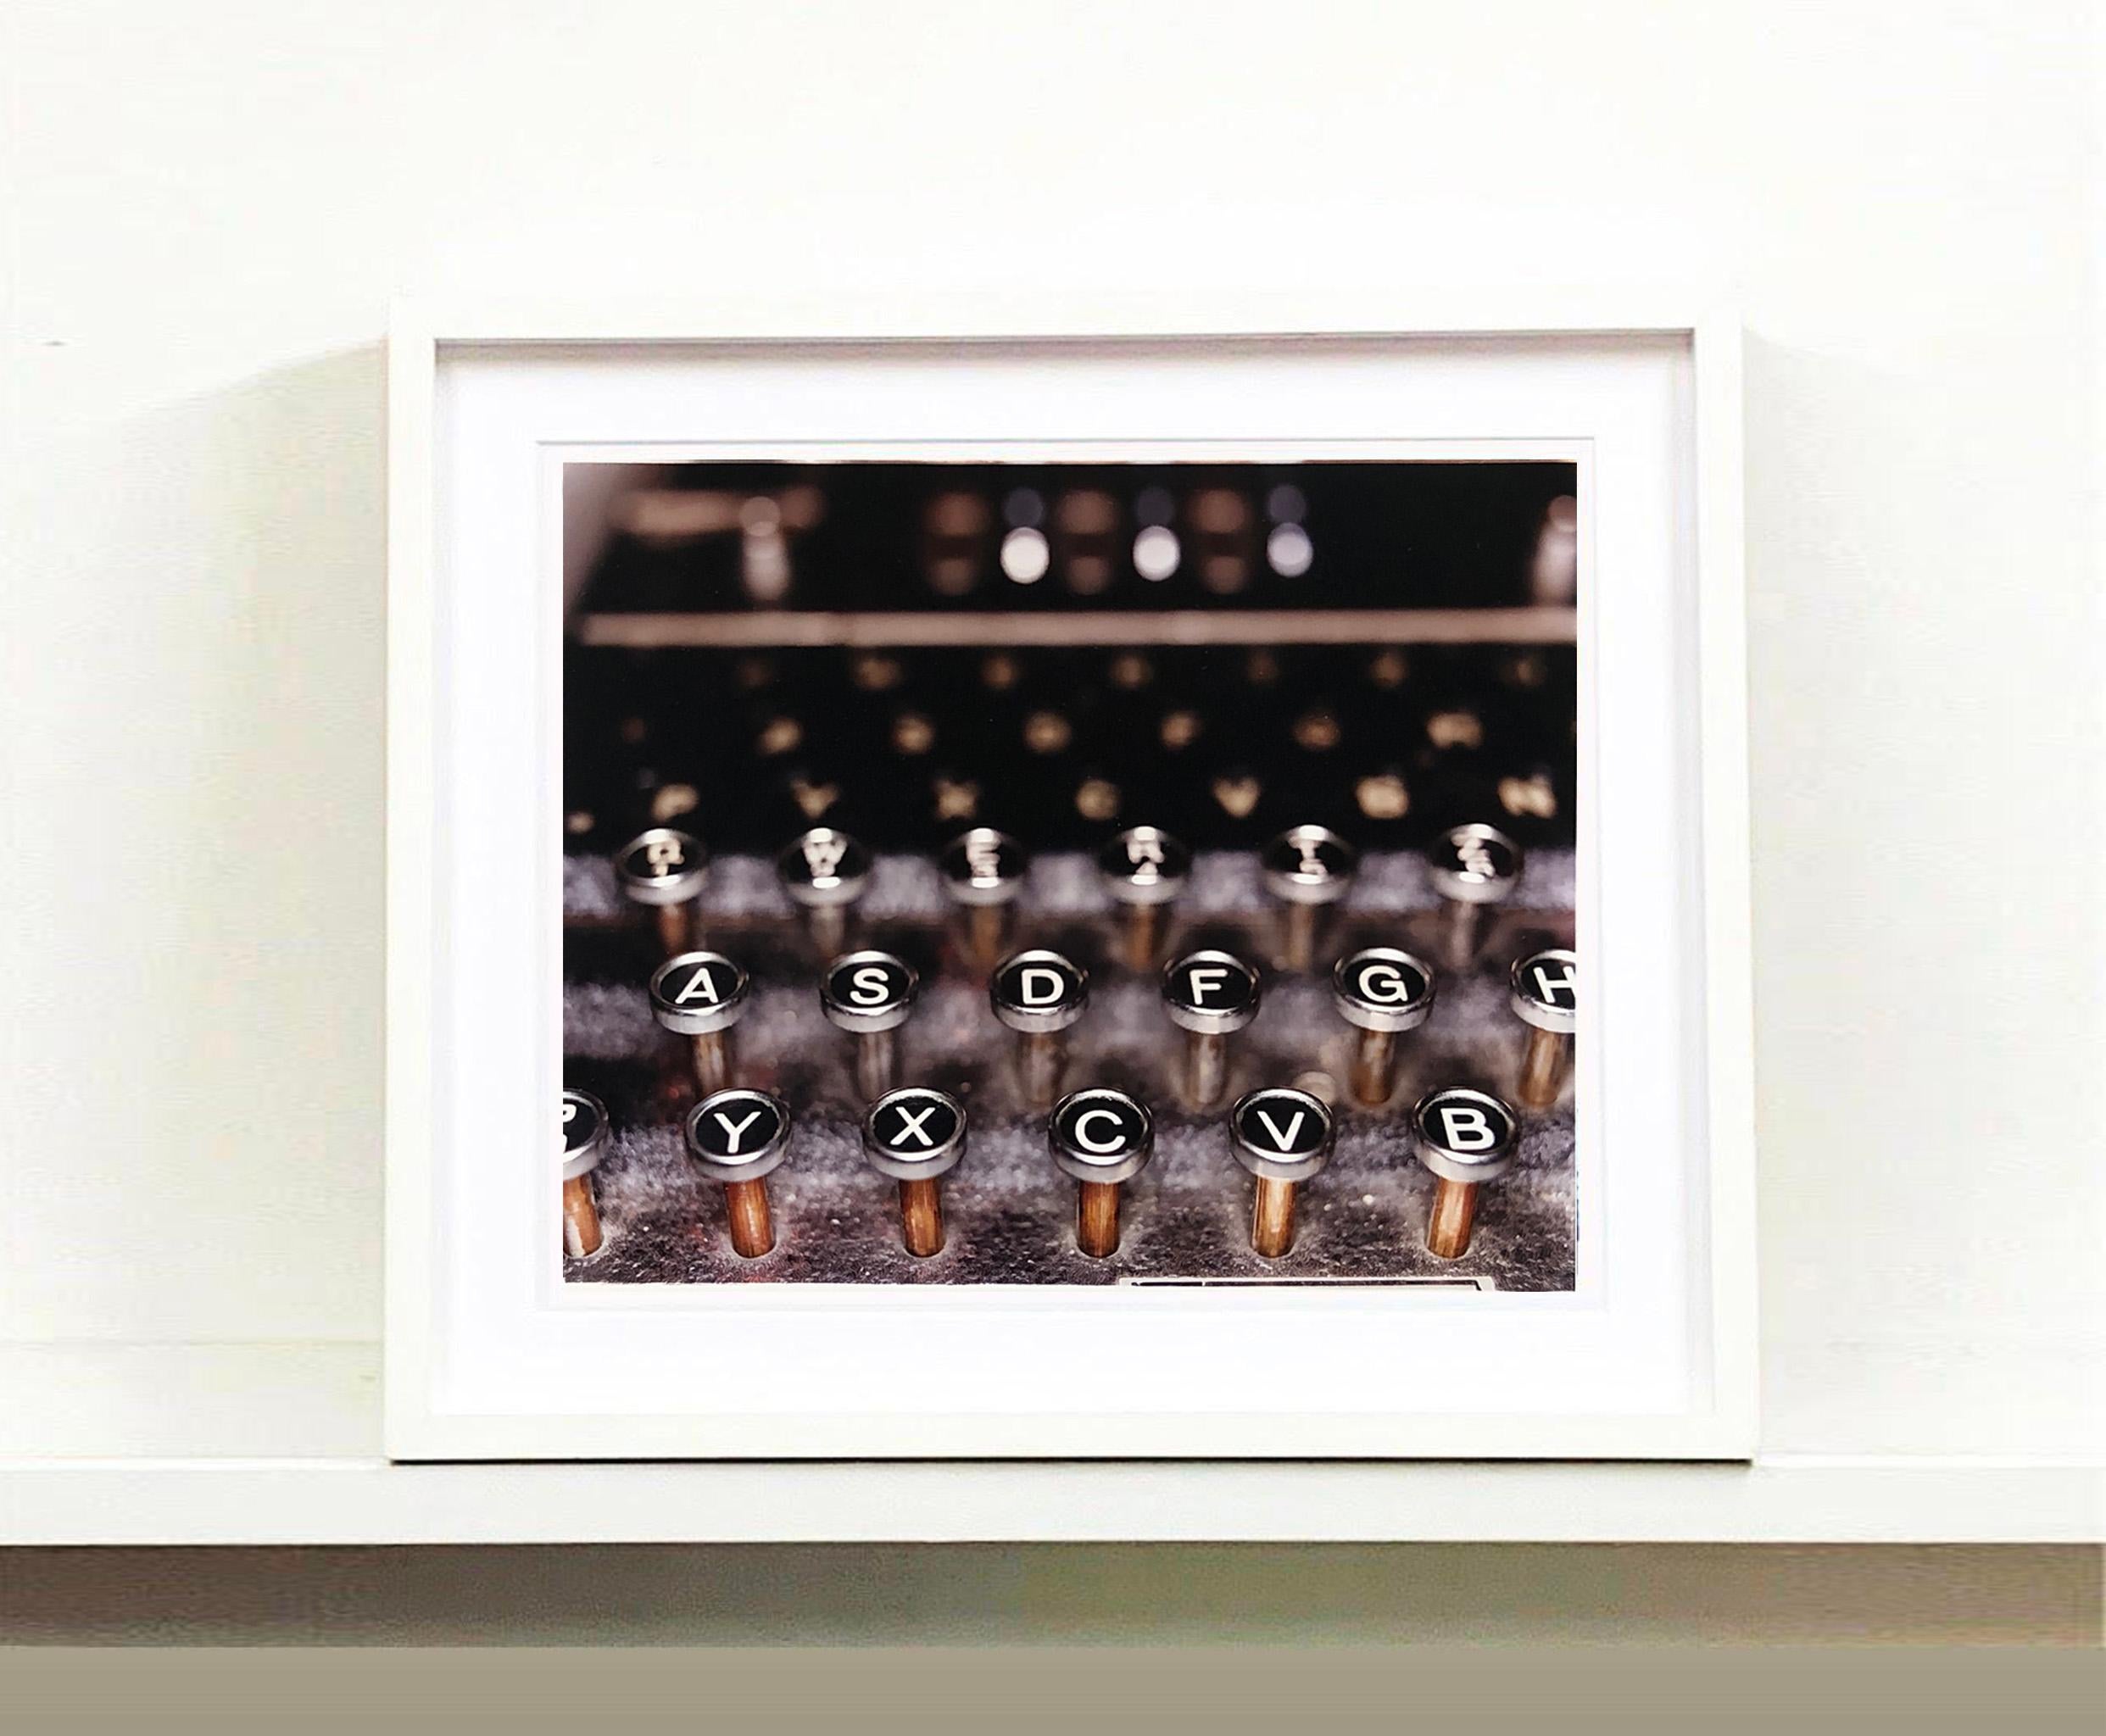 The Enigma Machine, Bletchley Park - British color photography - Contemporary Photograph by Richard Heeps